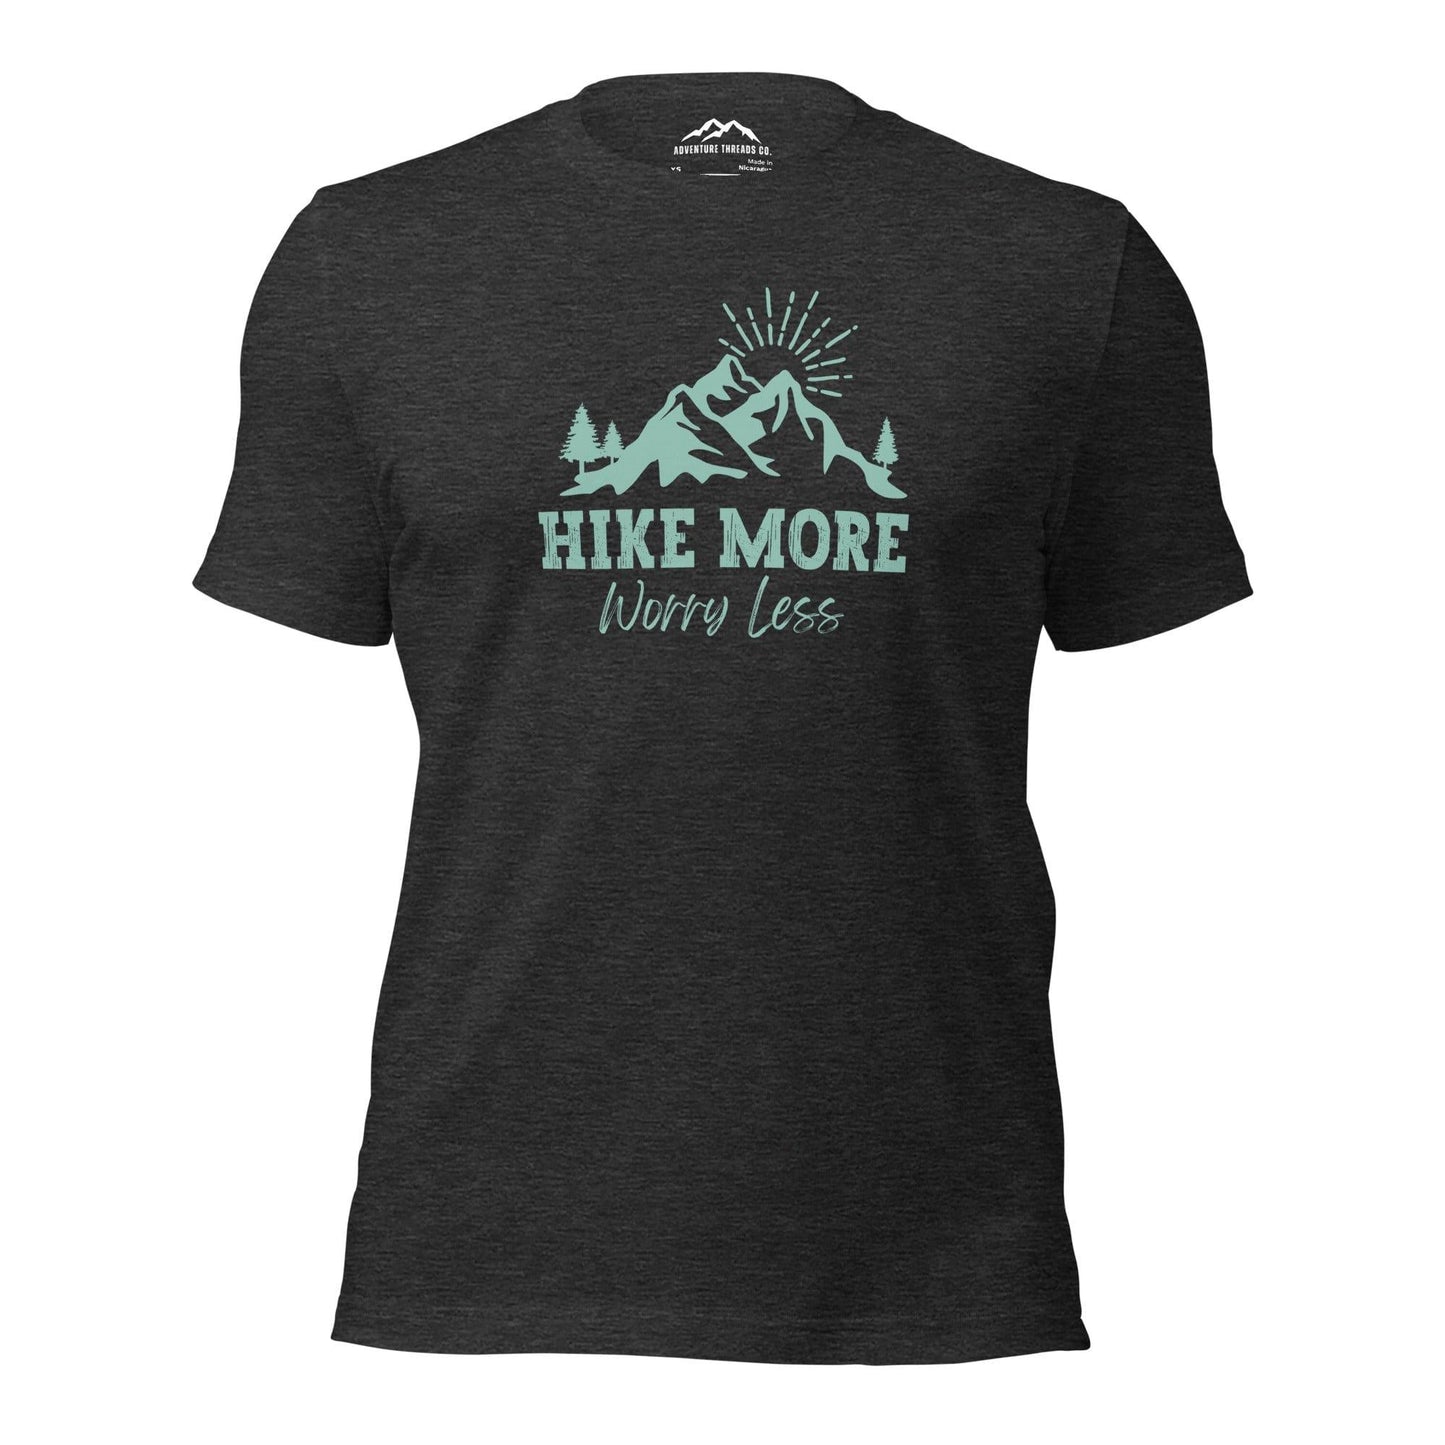 Hike More, Worry Less T-Shirt - Adventure Threads Company